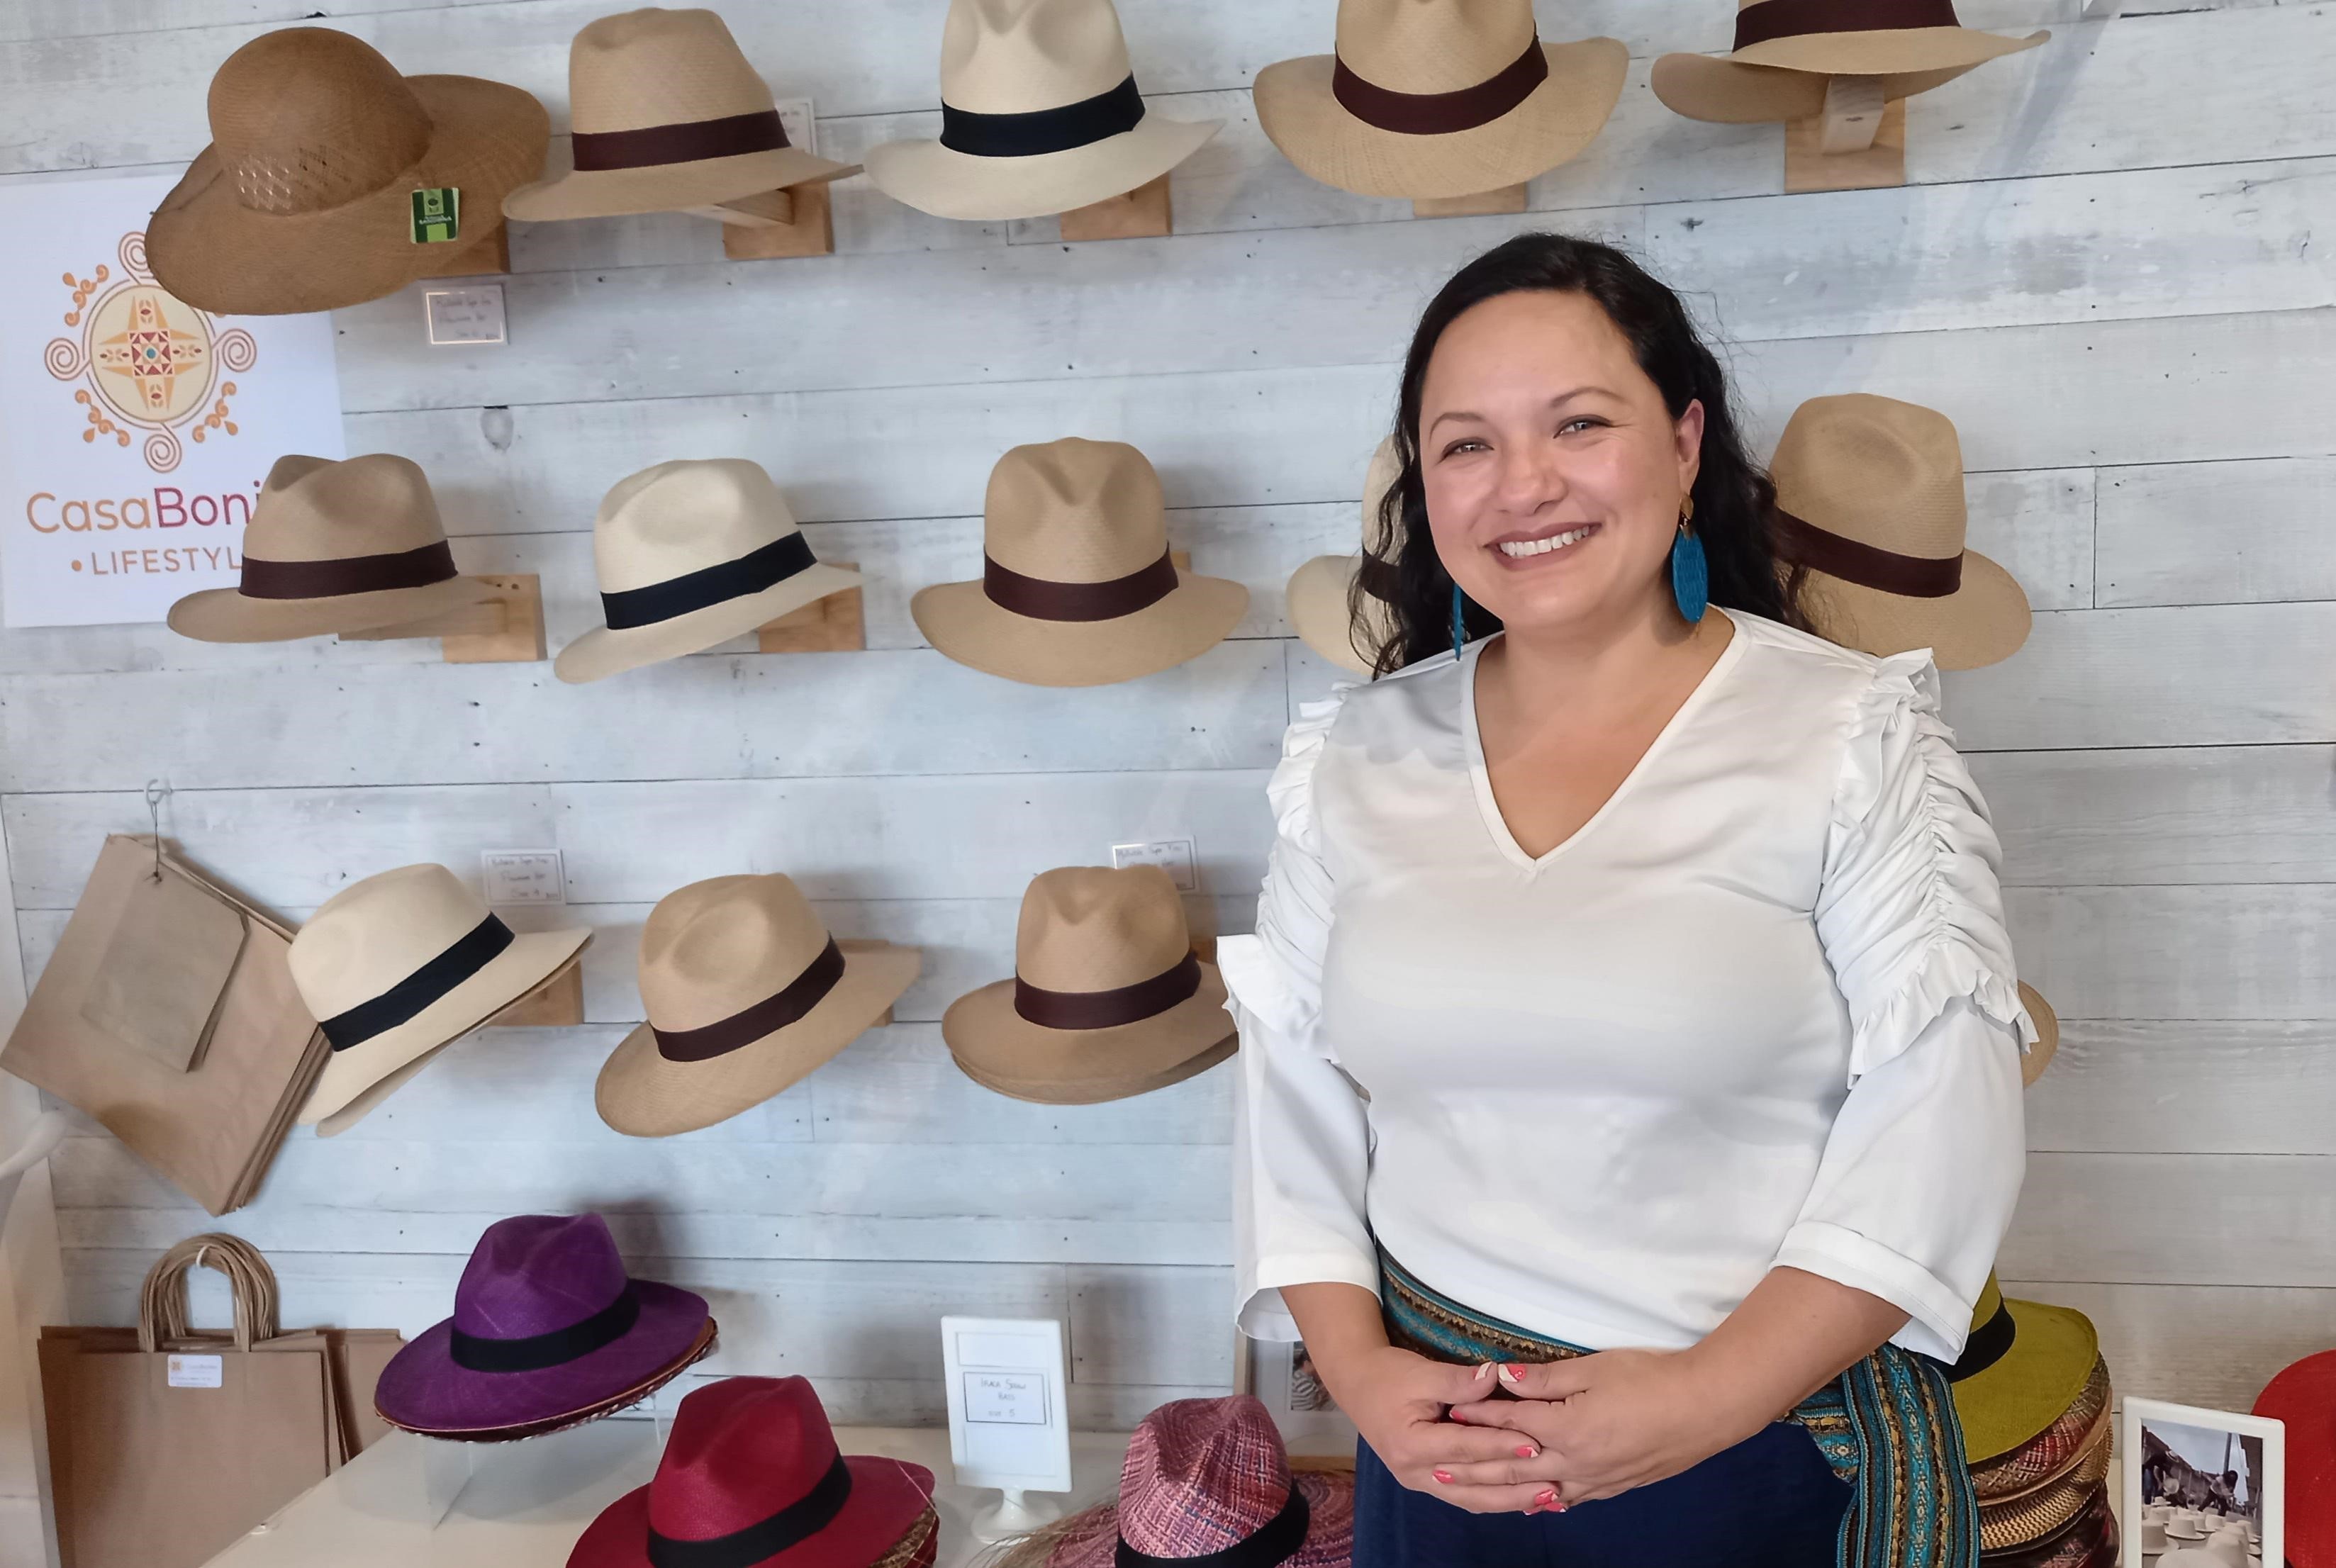 Social entrepreneur Liliana Bravo Quiroz is supporting other migrant women to realise their business dreams.